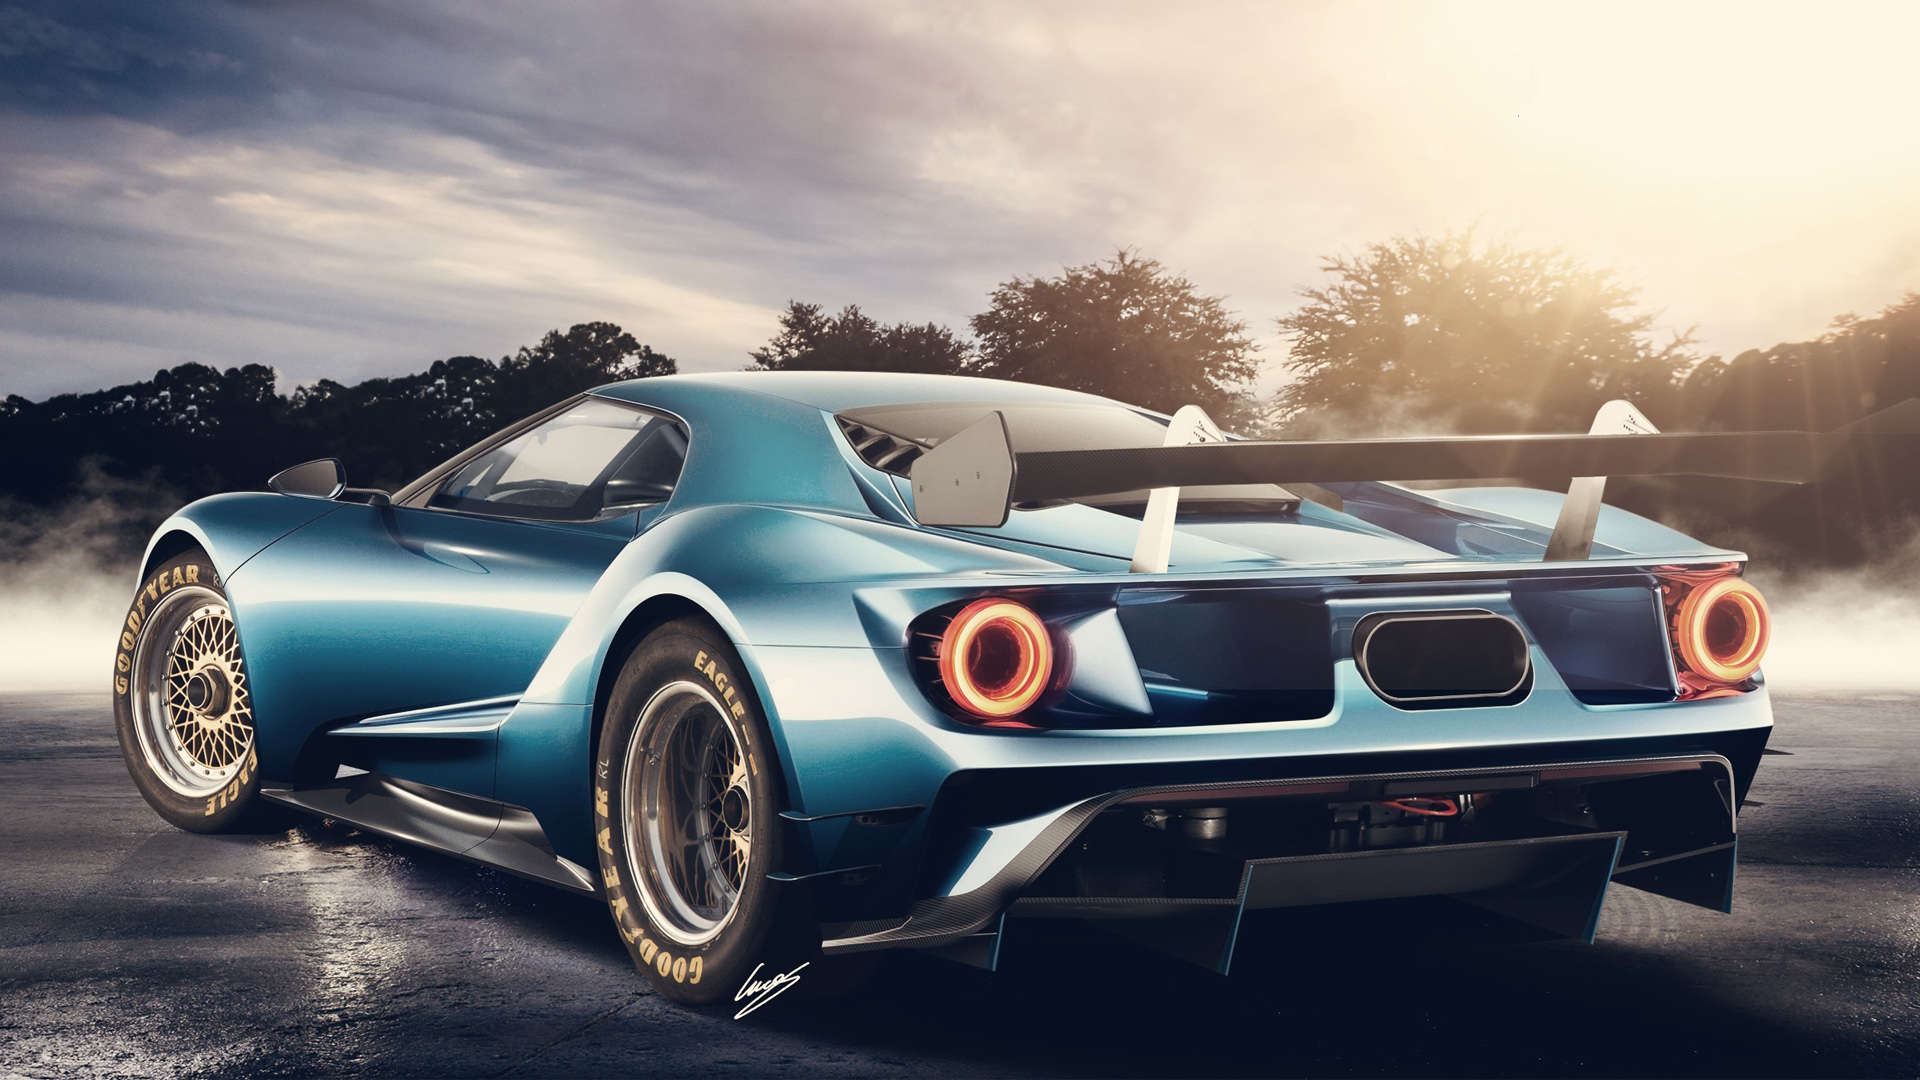 2017 Ford Gt Conceptrelated Car Wallpapers Wallpaper Cars Wallpaper Better